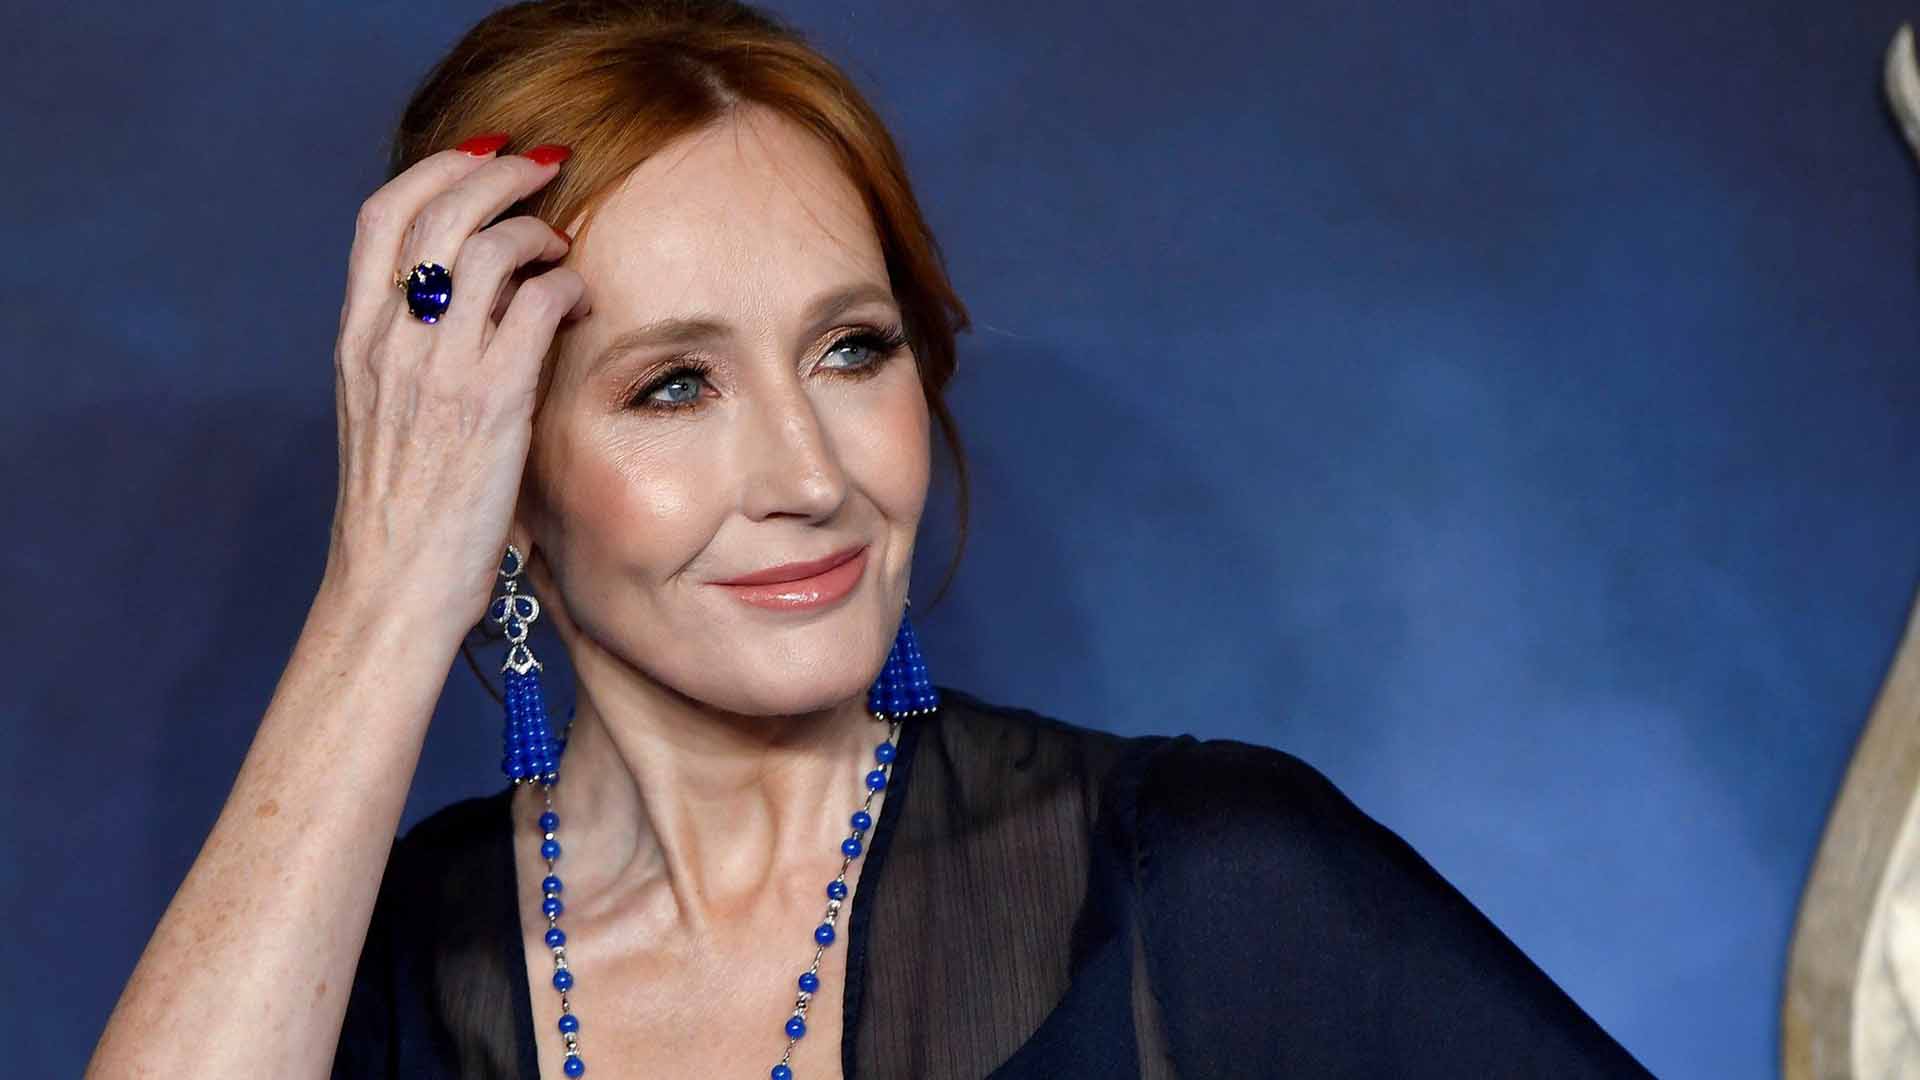 JK Rowling returns award from group linked to Kennedy family after organisation’s prez criticises her transgender comments